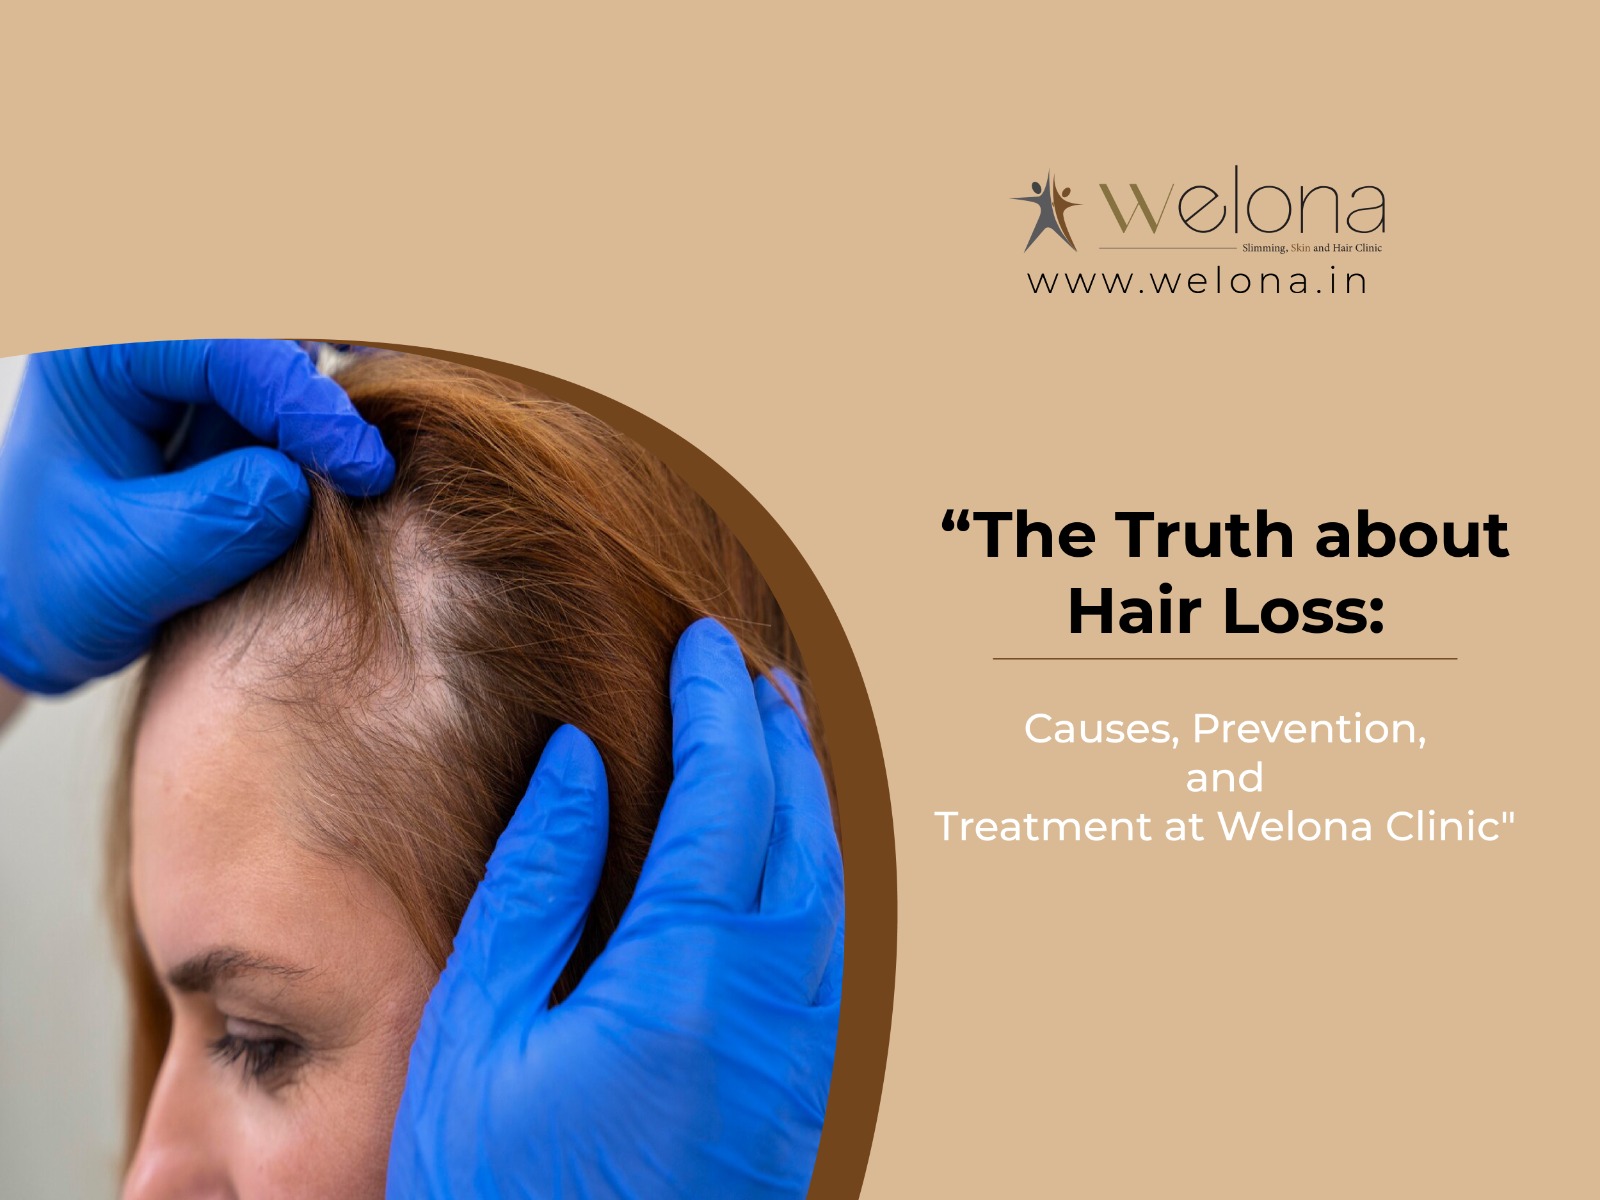 The Truth about Hair Loss: Causes, Prevention, and Treatment at Welona Clinic